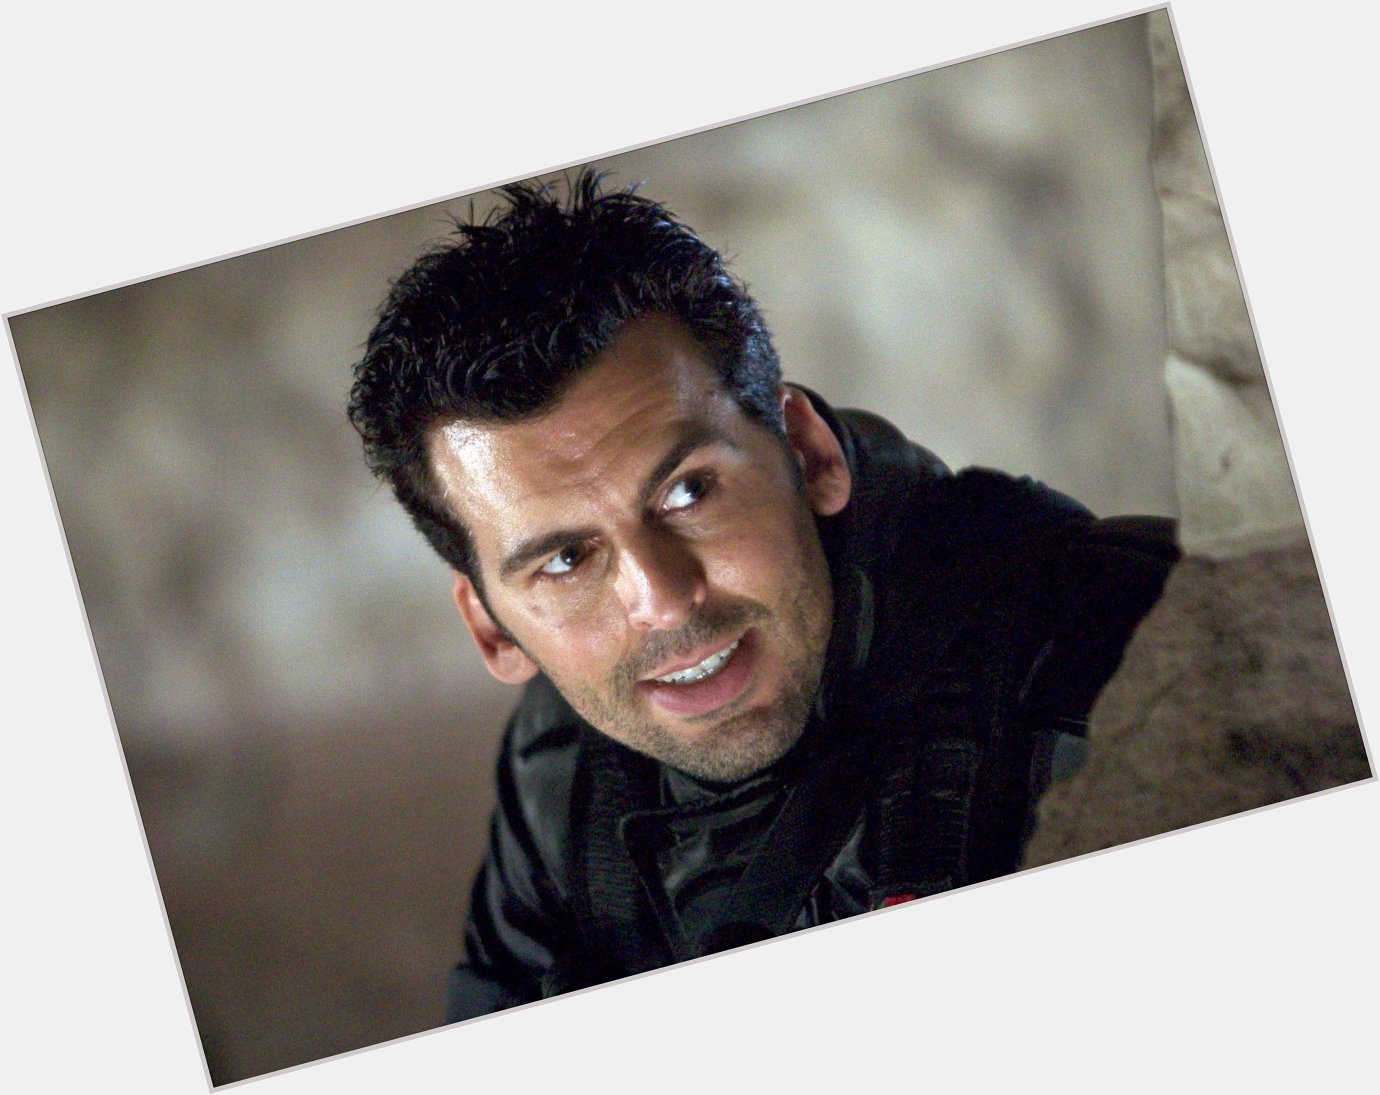 Happy Birthday to ODED FEHR (THE MUMMY and RESIDENT EVIL franchises) who turns 47 today 